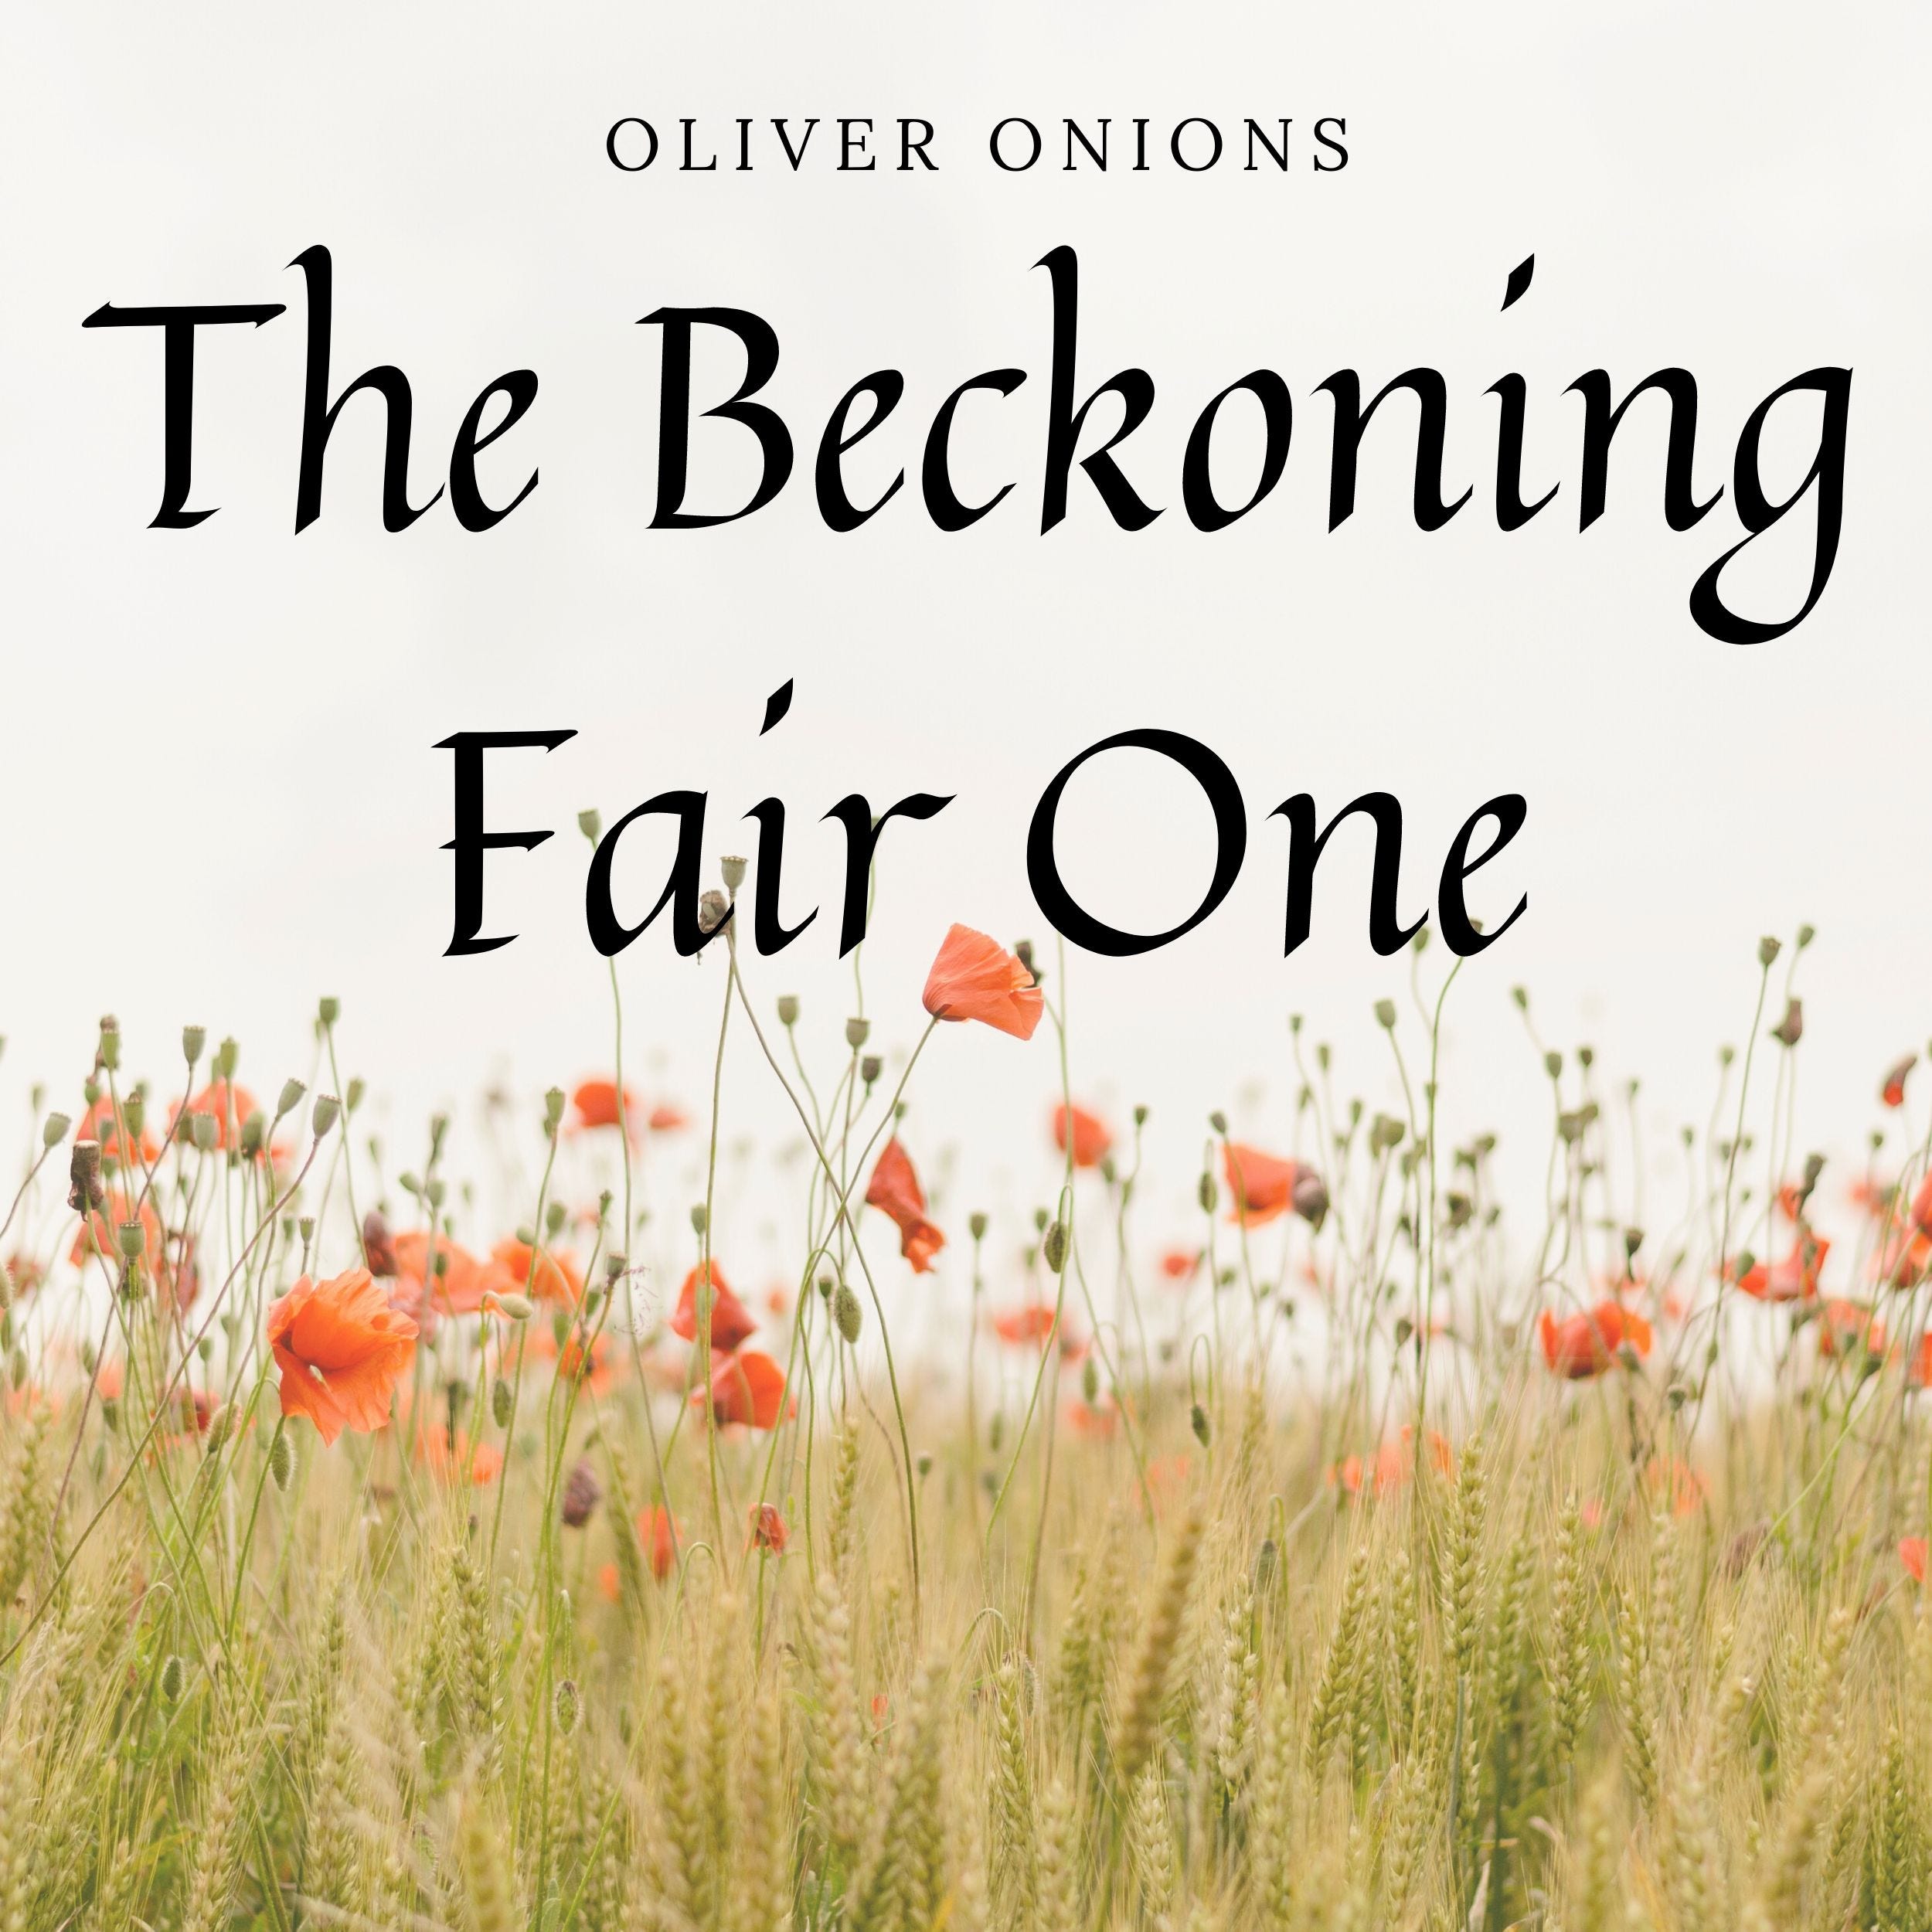 The Beckoning Fair One by Oliver Onions (1 of 4)